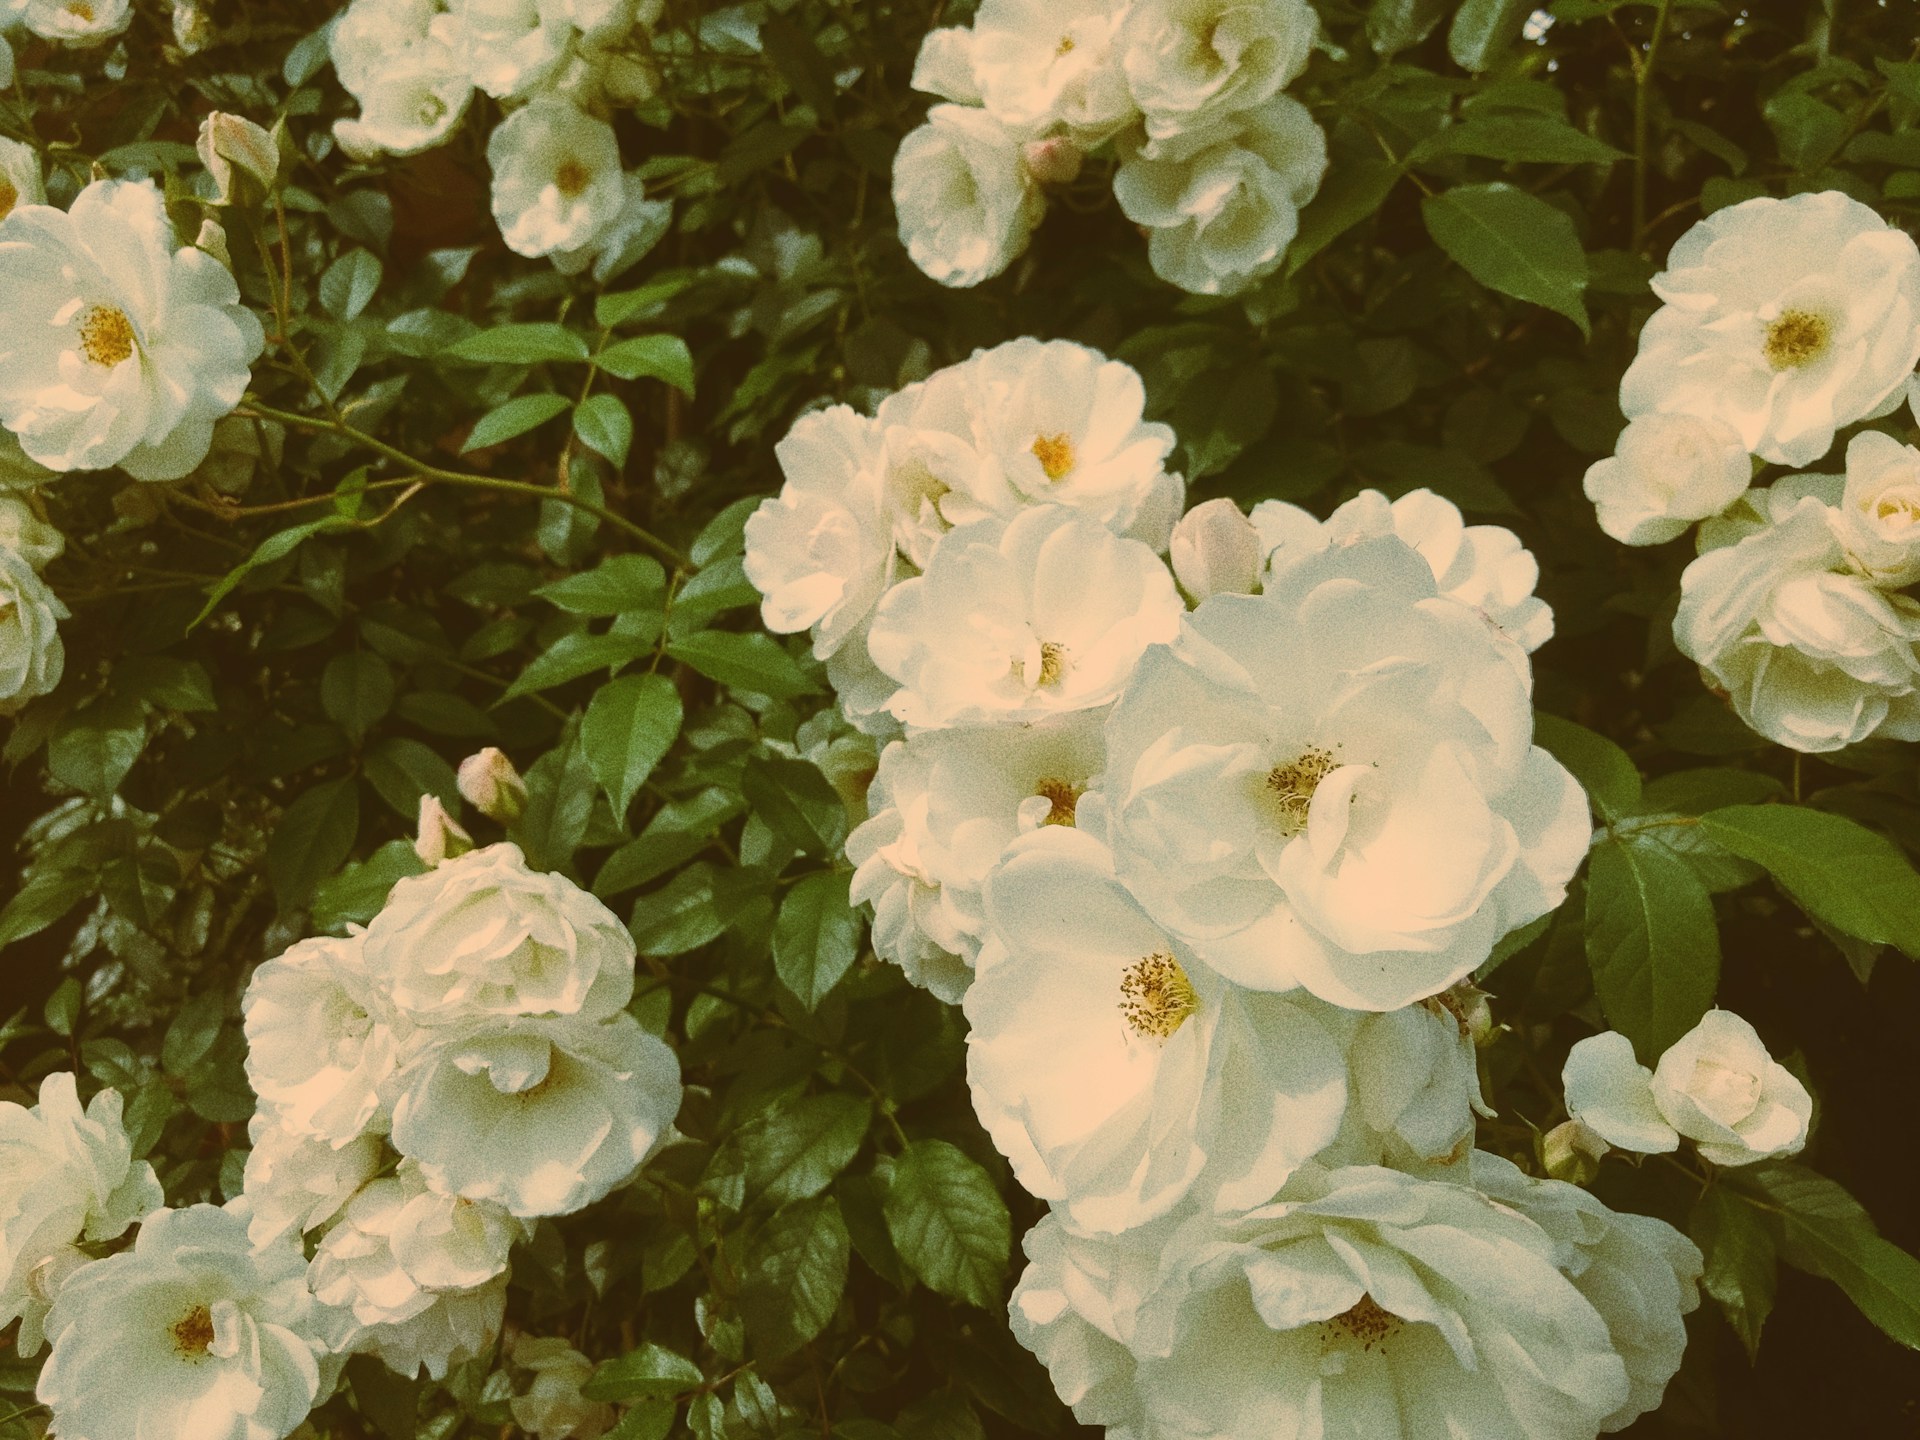 Roses Vintage Aesthetic Wallpapers 1920x1440